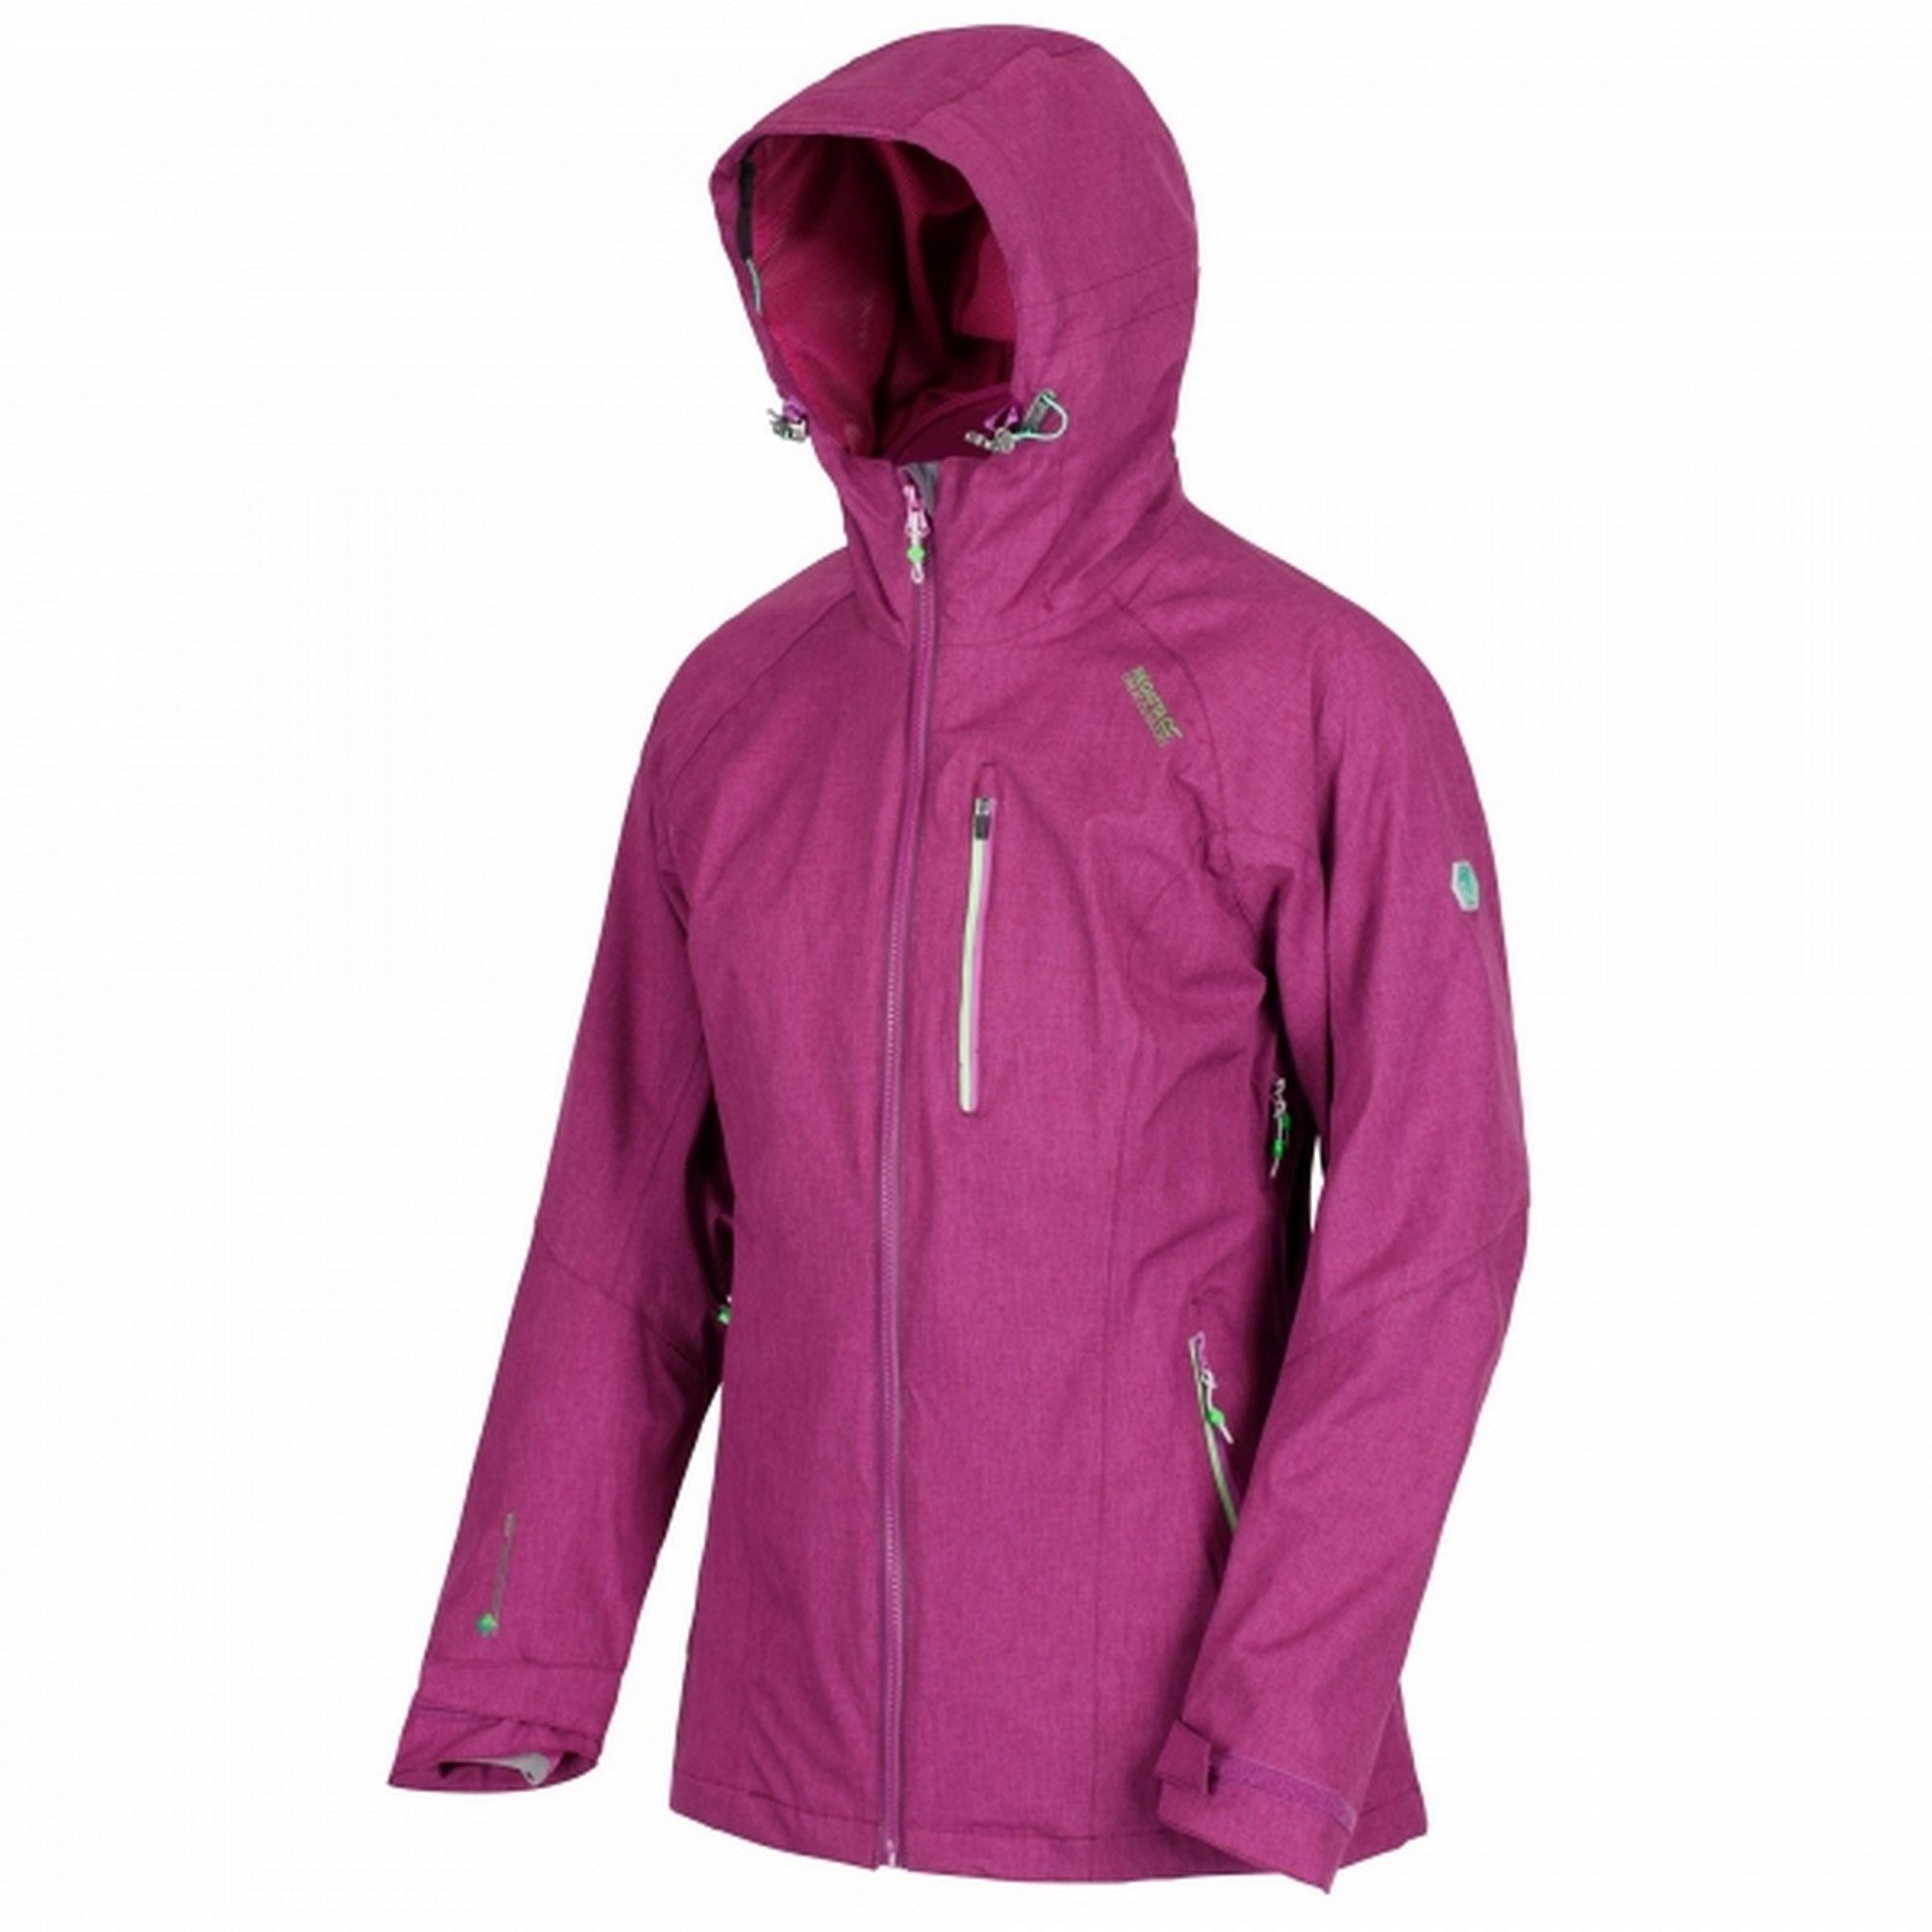 Womens hooded jacket made of Isotex 15000 100% Polyester stretch fabric. Waterproof and breathable. Durable water repellent finish. Taped seams. Detachable technical wired peaked hood with adjusters. 2-way underarm ventilation zippers. Hi-tech water repellent centre front zip with inner zip and chin guard. 2 lower and 1 chest pocket with hi-tech water repellent zips. Inner zipped security pocket. Articulated sleeves for enhanced range of movement. Adjustable cuffs. Adjustable shockcord hem. Ideal for wearing outdoors on a cold day.